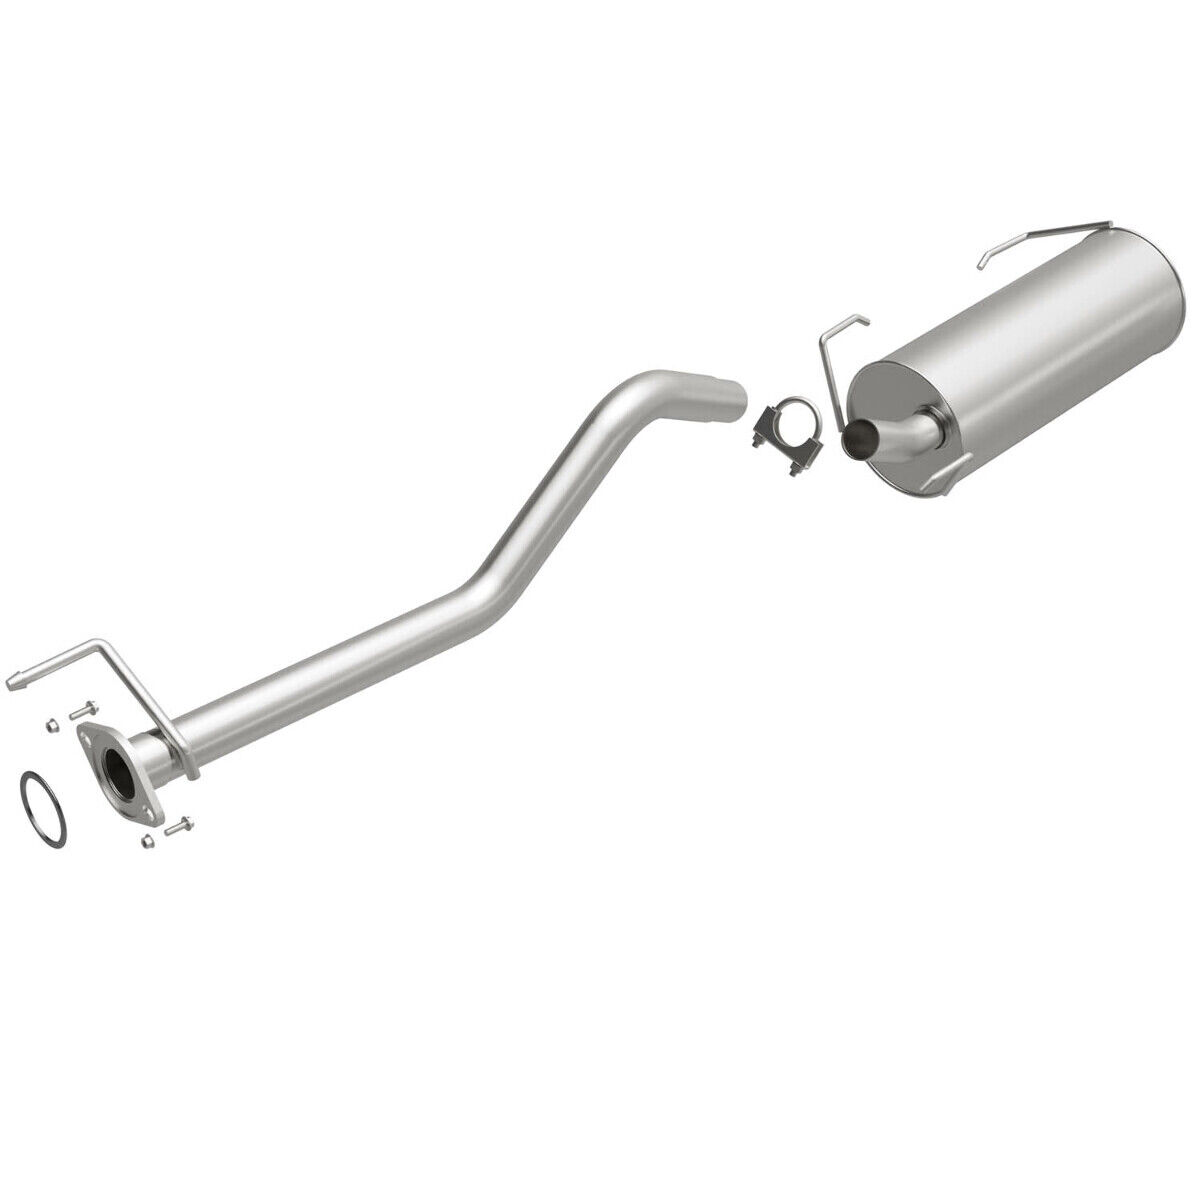 Fits 1991-1995 Toyota Previa 2.4L Direct-Fit Replacement Exhaust System 106-0324